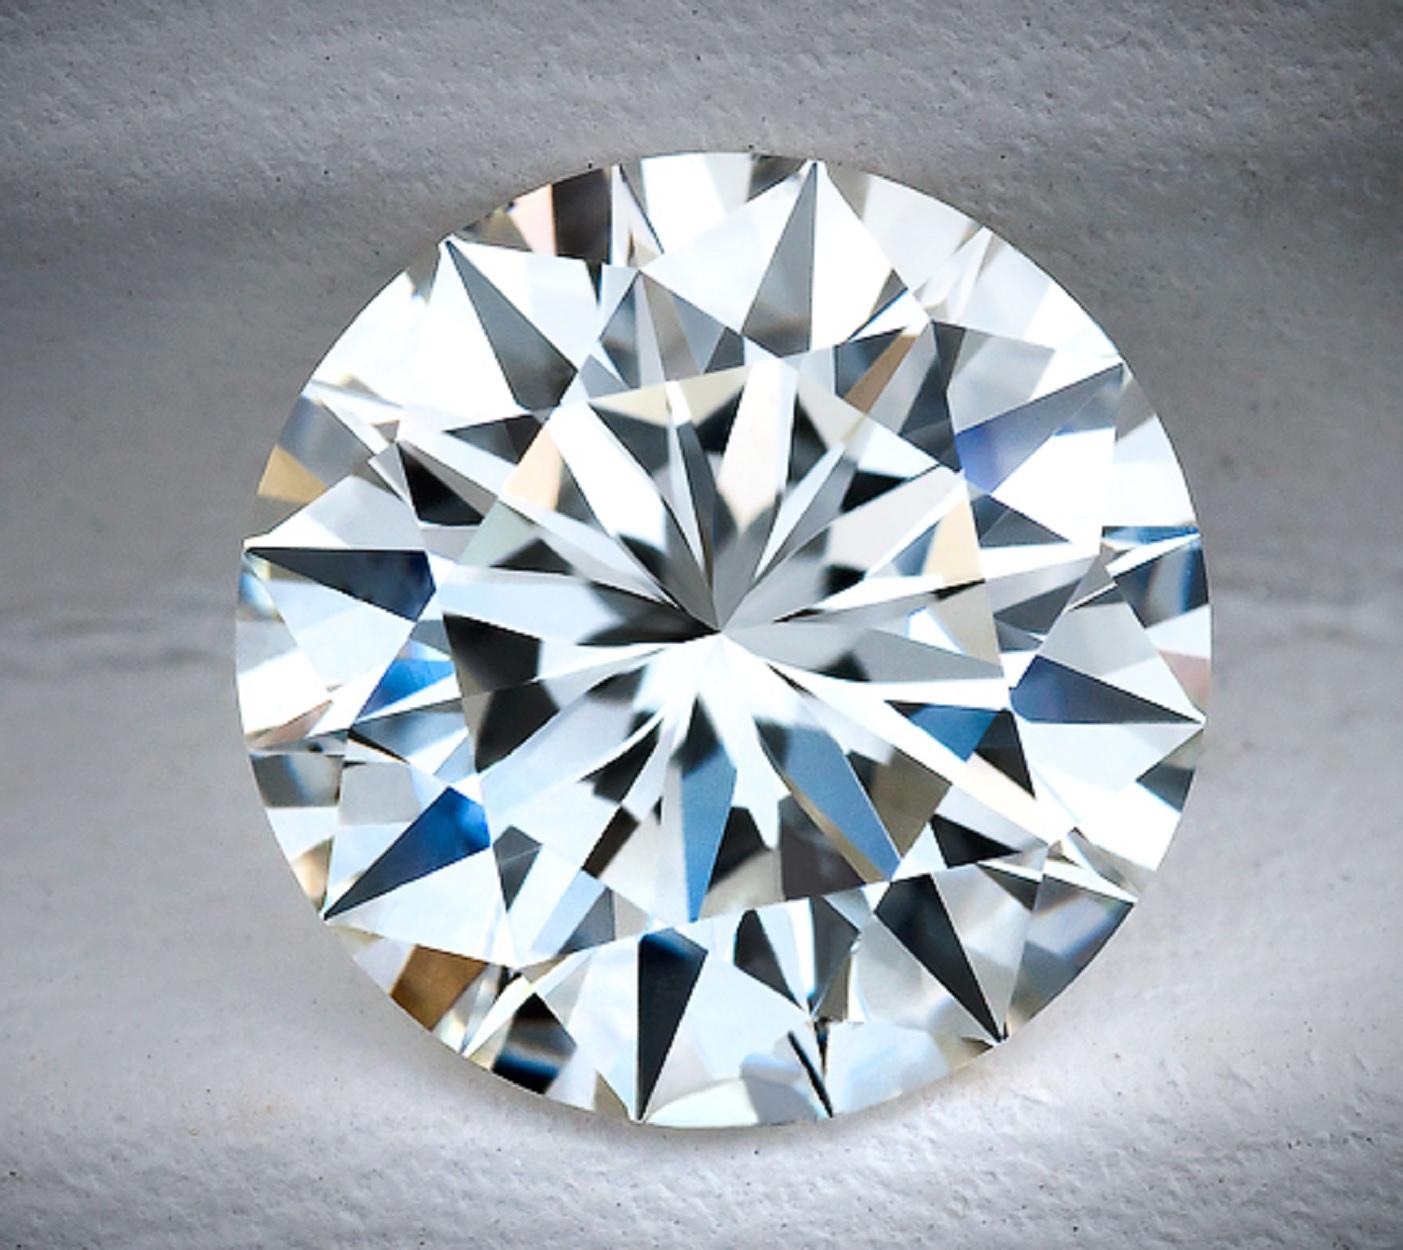 An exceptional diamond an investment for sure a very white f Color vs1 clarity natural brilliant cut diamond with excellent proportions and excellent cut certified by GIA.

